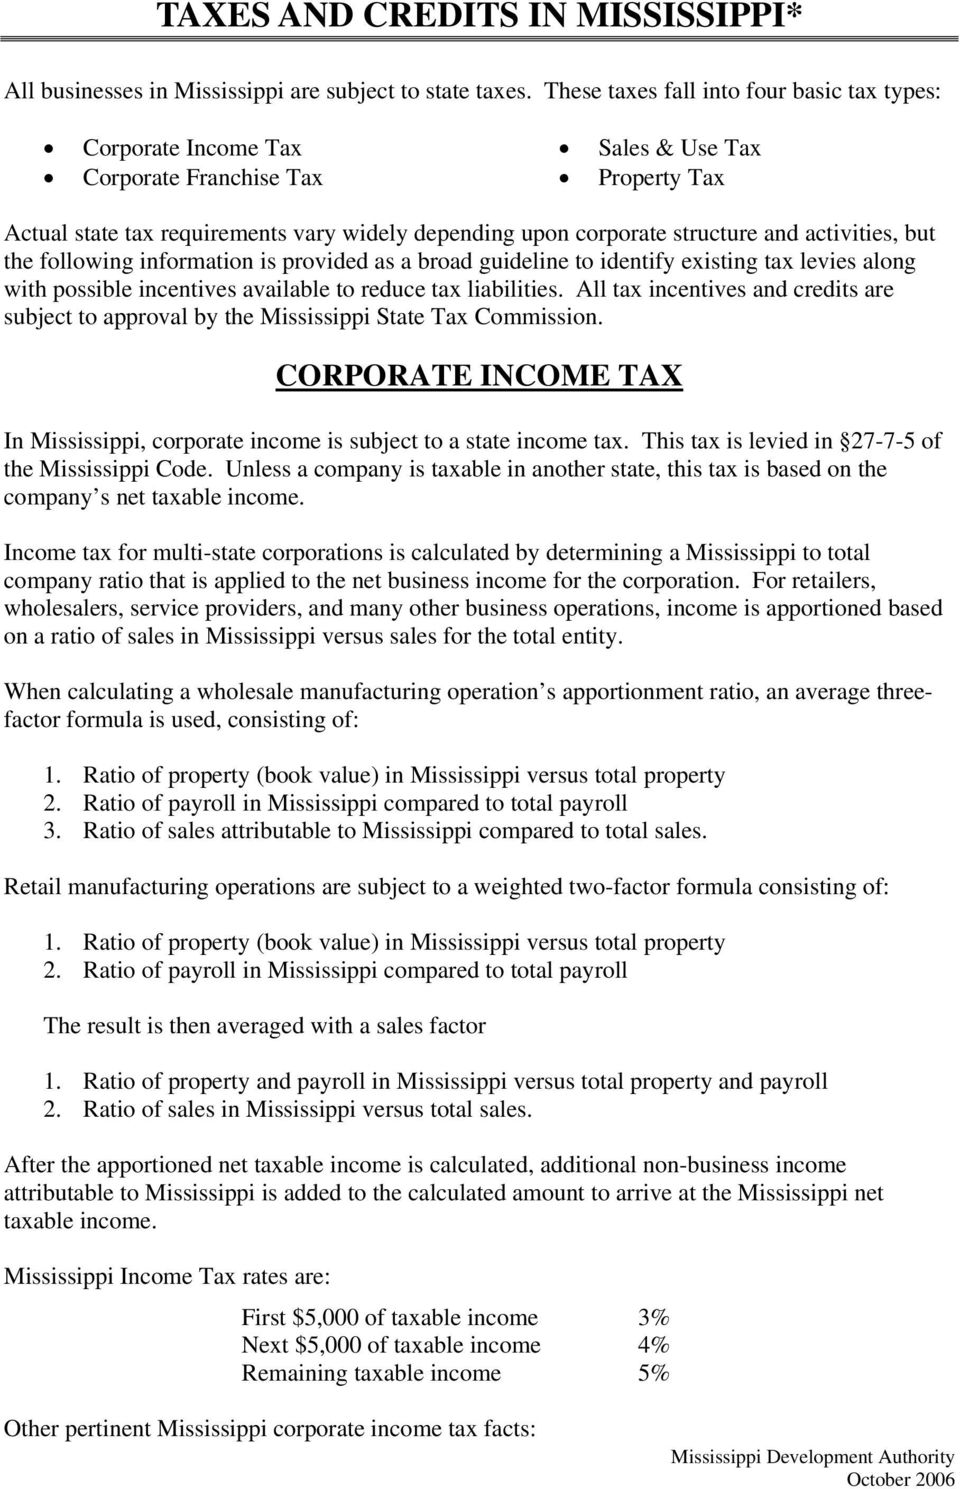 activities, but the following information is provided as a broad guideline to identify existing tax levies along with possible incentives available to reduce tax liabilities.